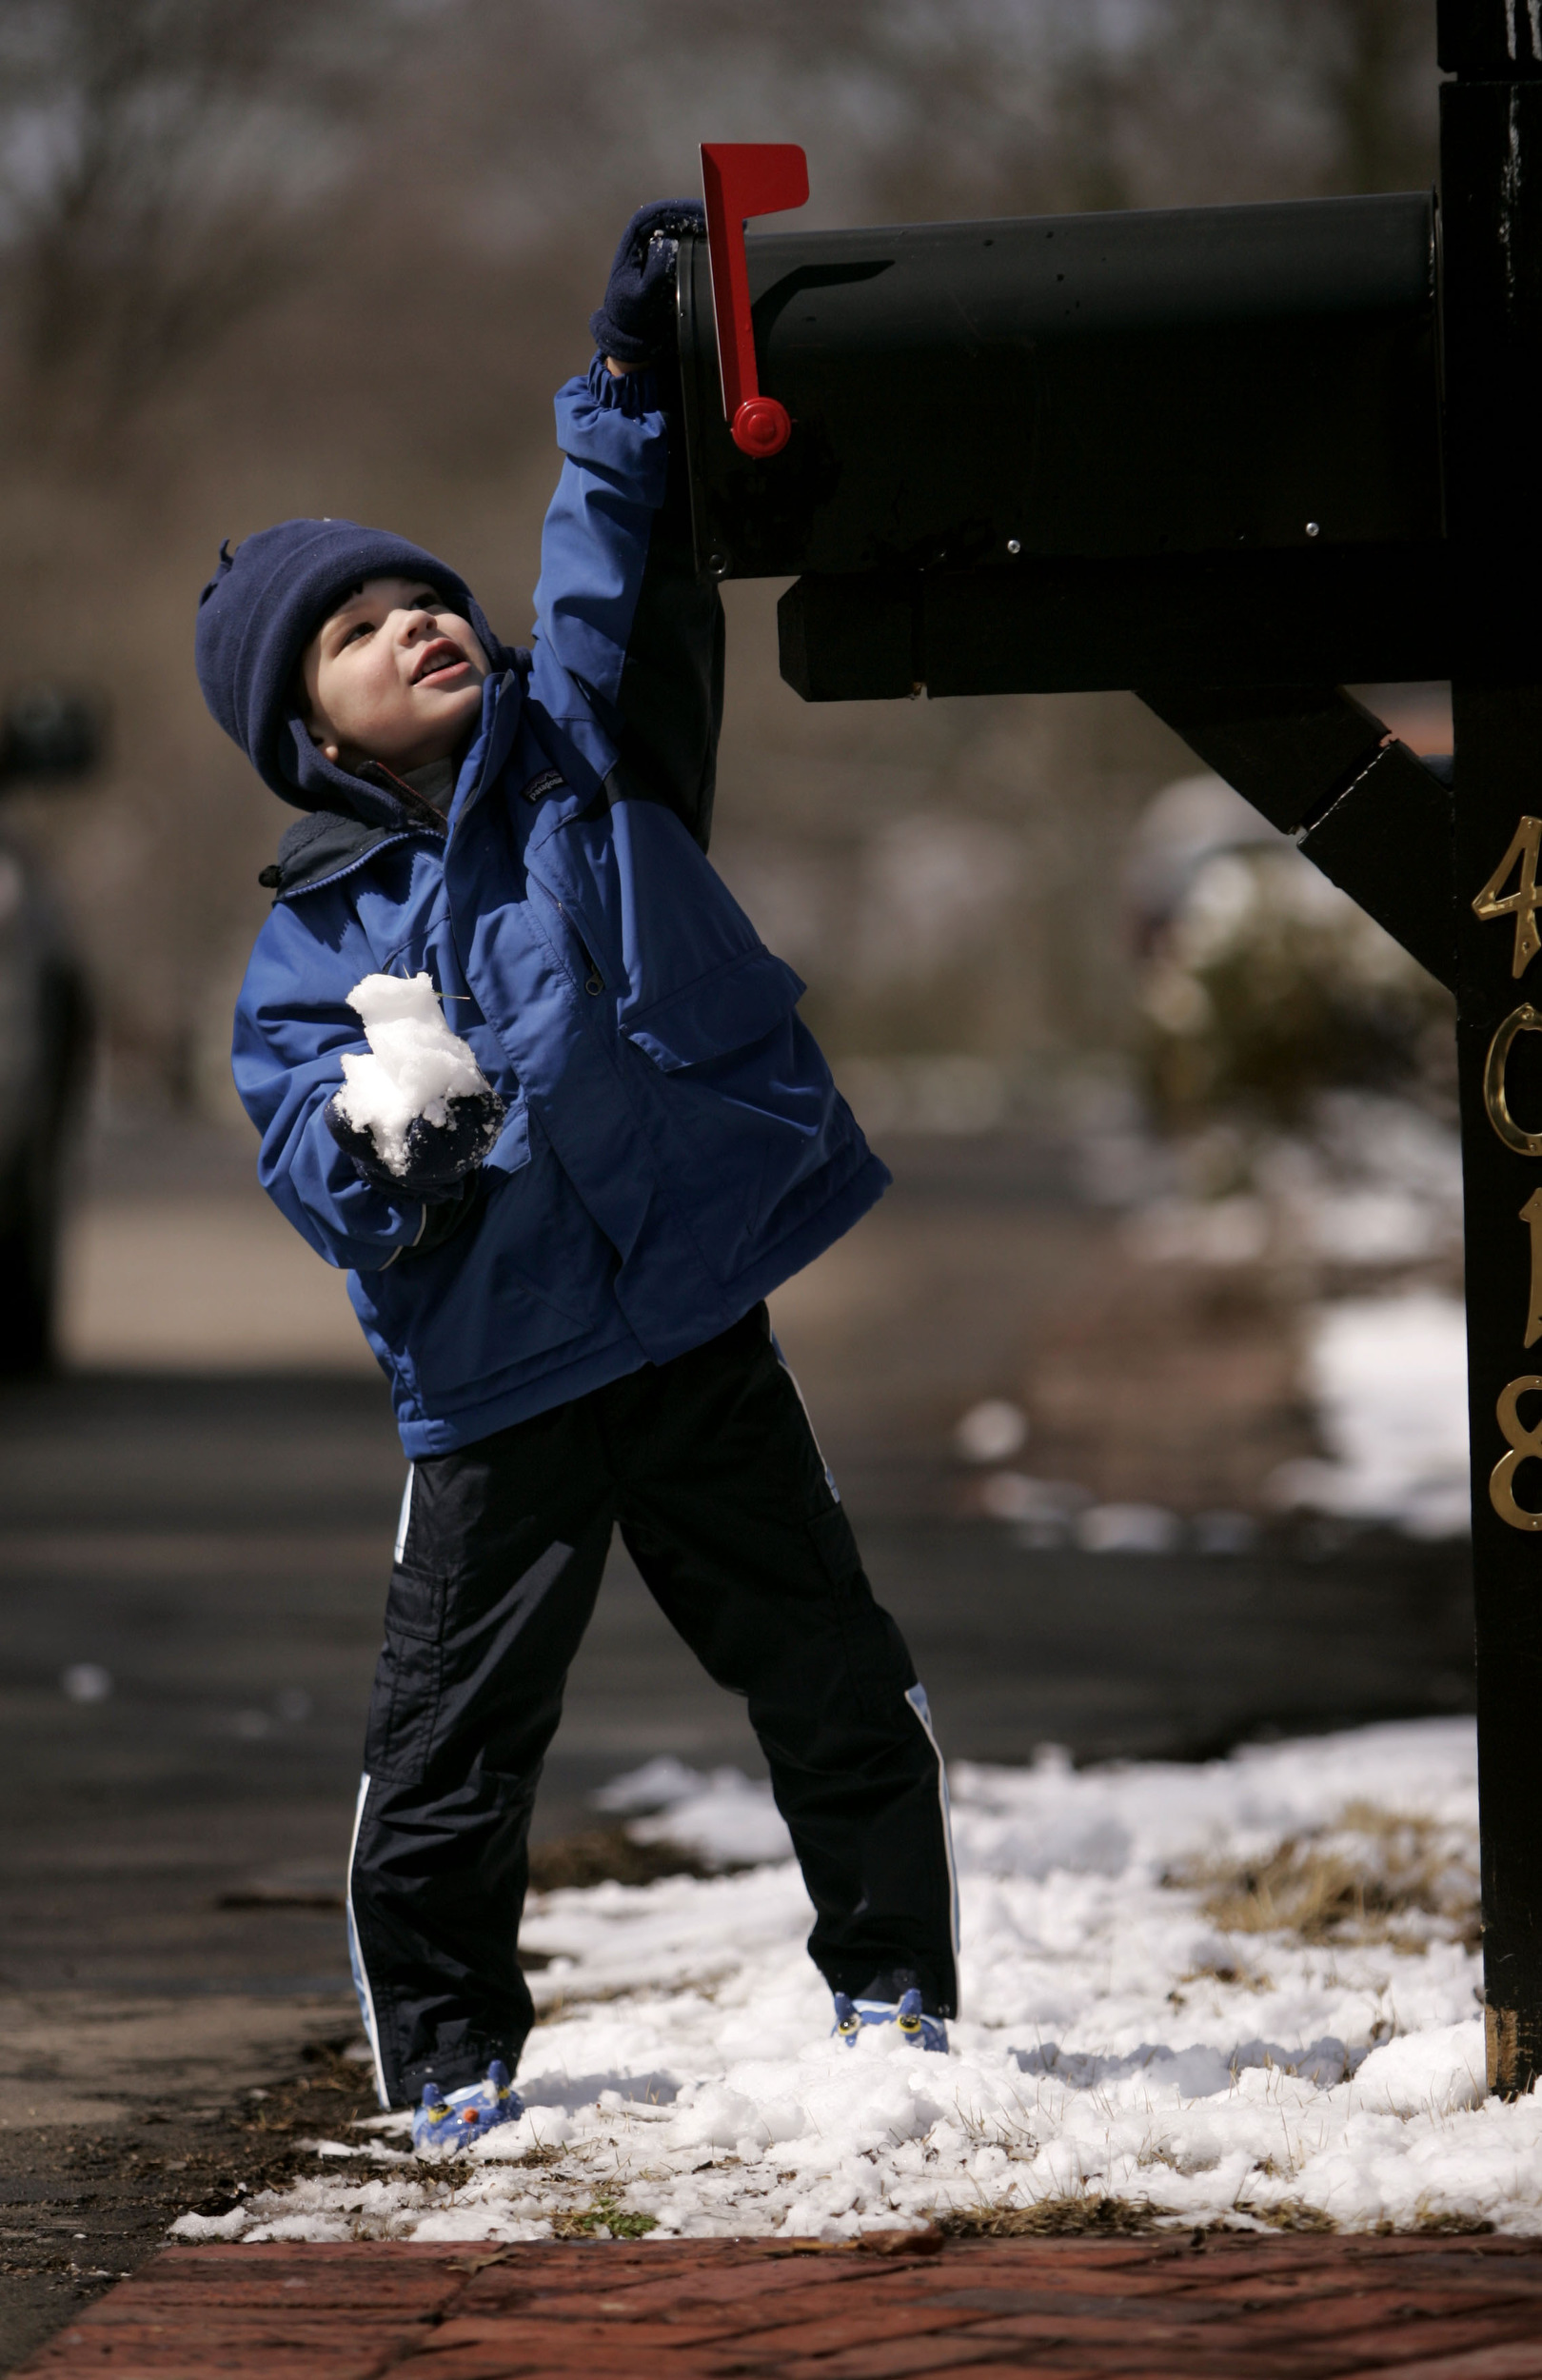  Chase Fields, 3, puts a snowball in a mailbox Saturday morning as several inches of snowfall began melting quickly Saturday, March 8, 2008 in Nashville, Tenn.  